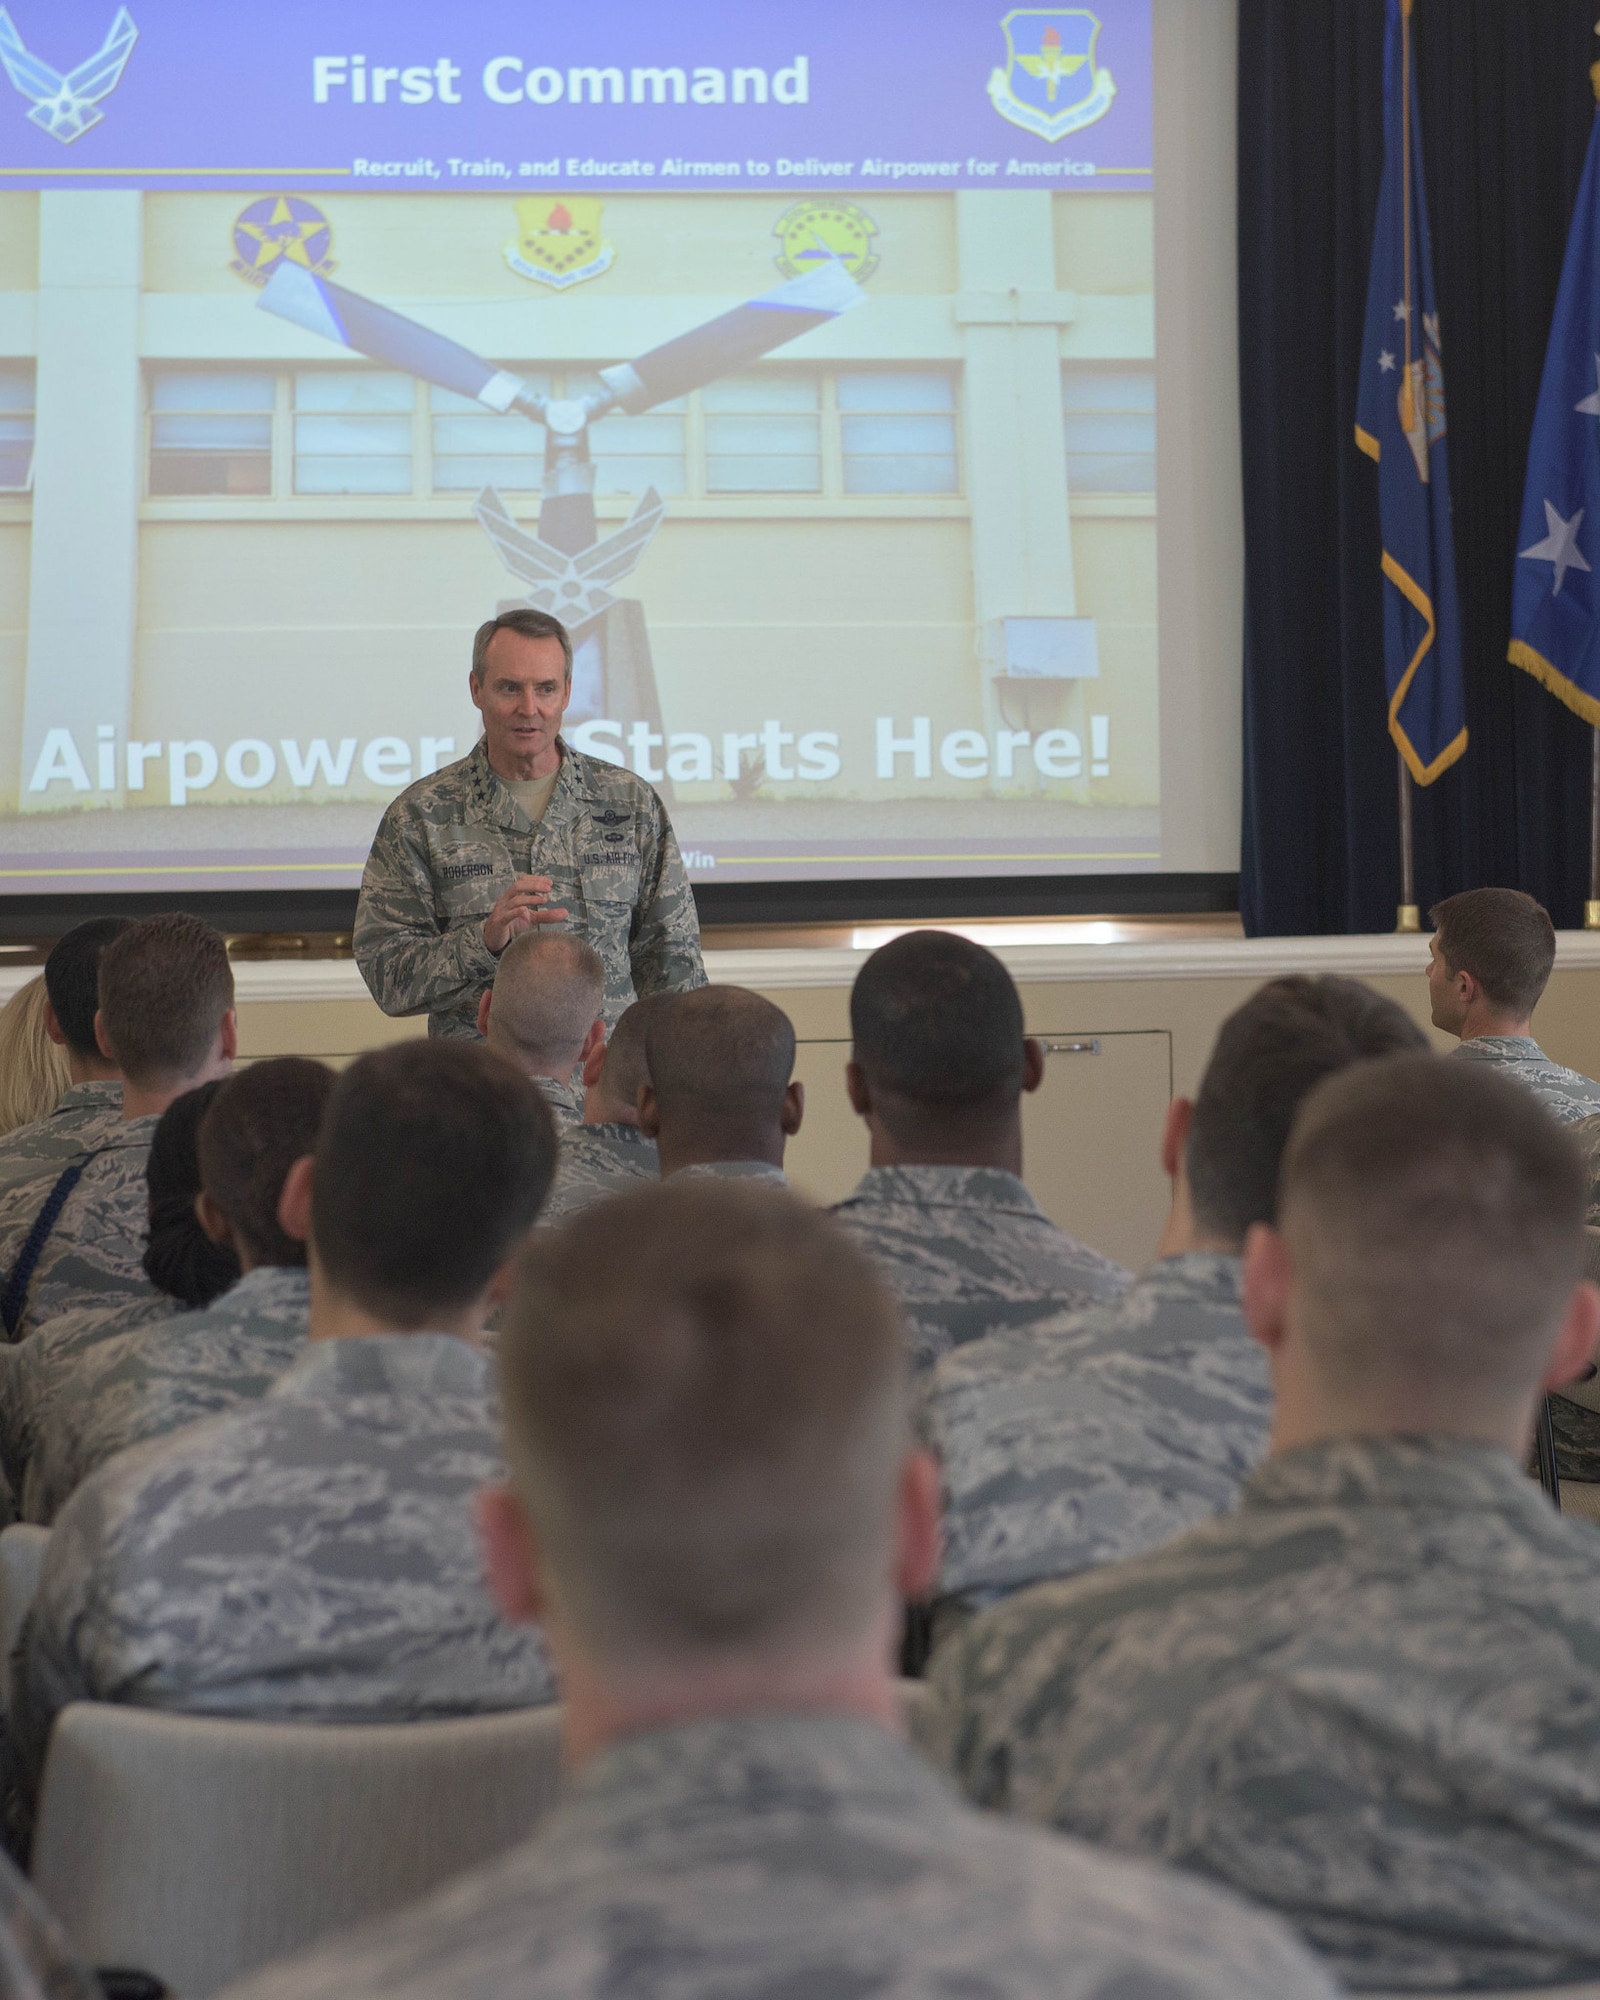 The commander of the Air Education and Training Command, Lt. Gen Darryl Roberson, speaks with Airmen at the Defense Language Institute Foreign Language Center as a part of a tour of installations that he oversees. (U.S. Army photo by Amber Whittington) 